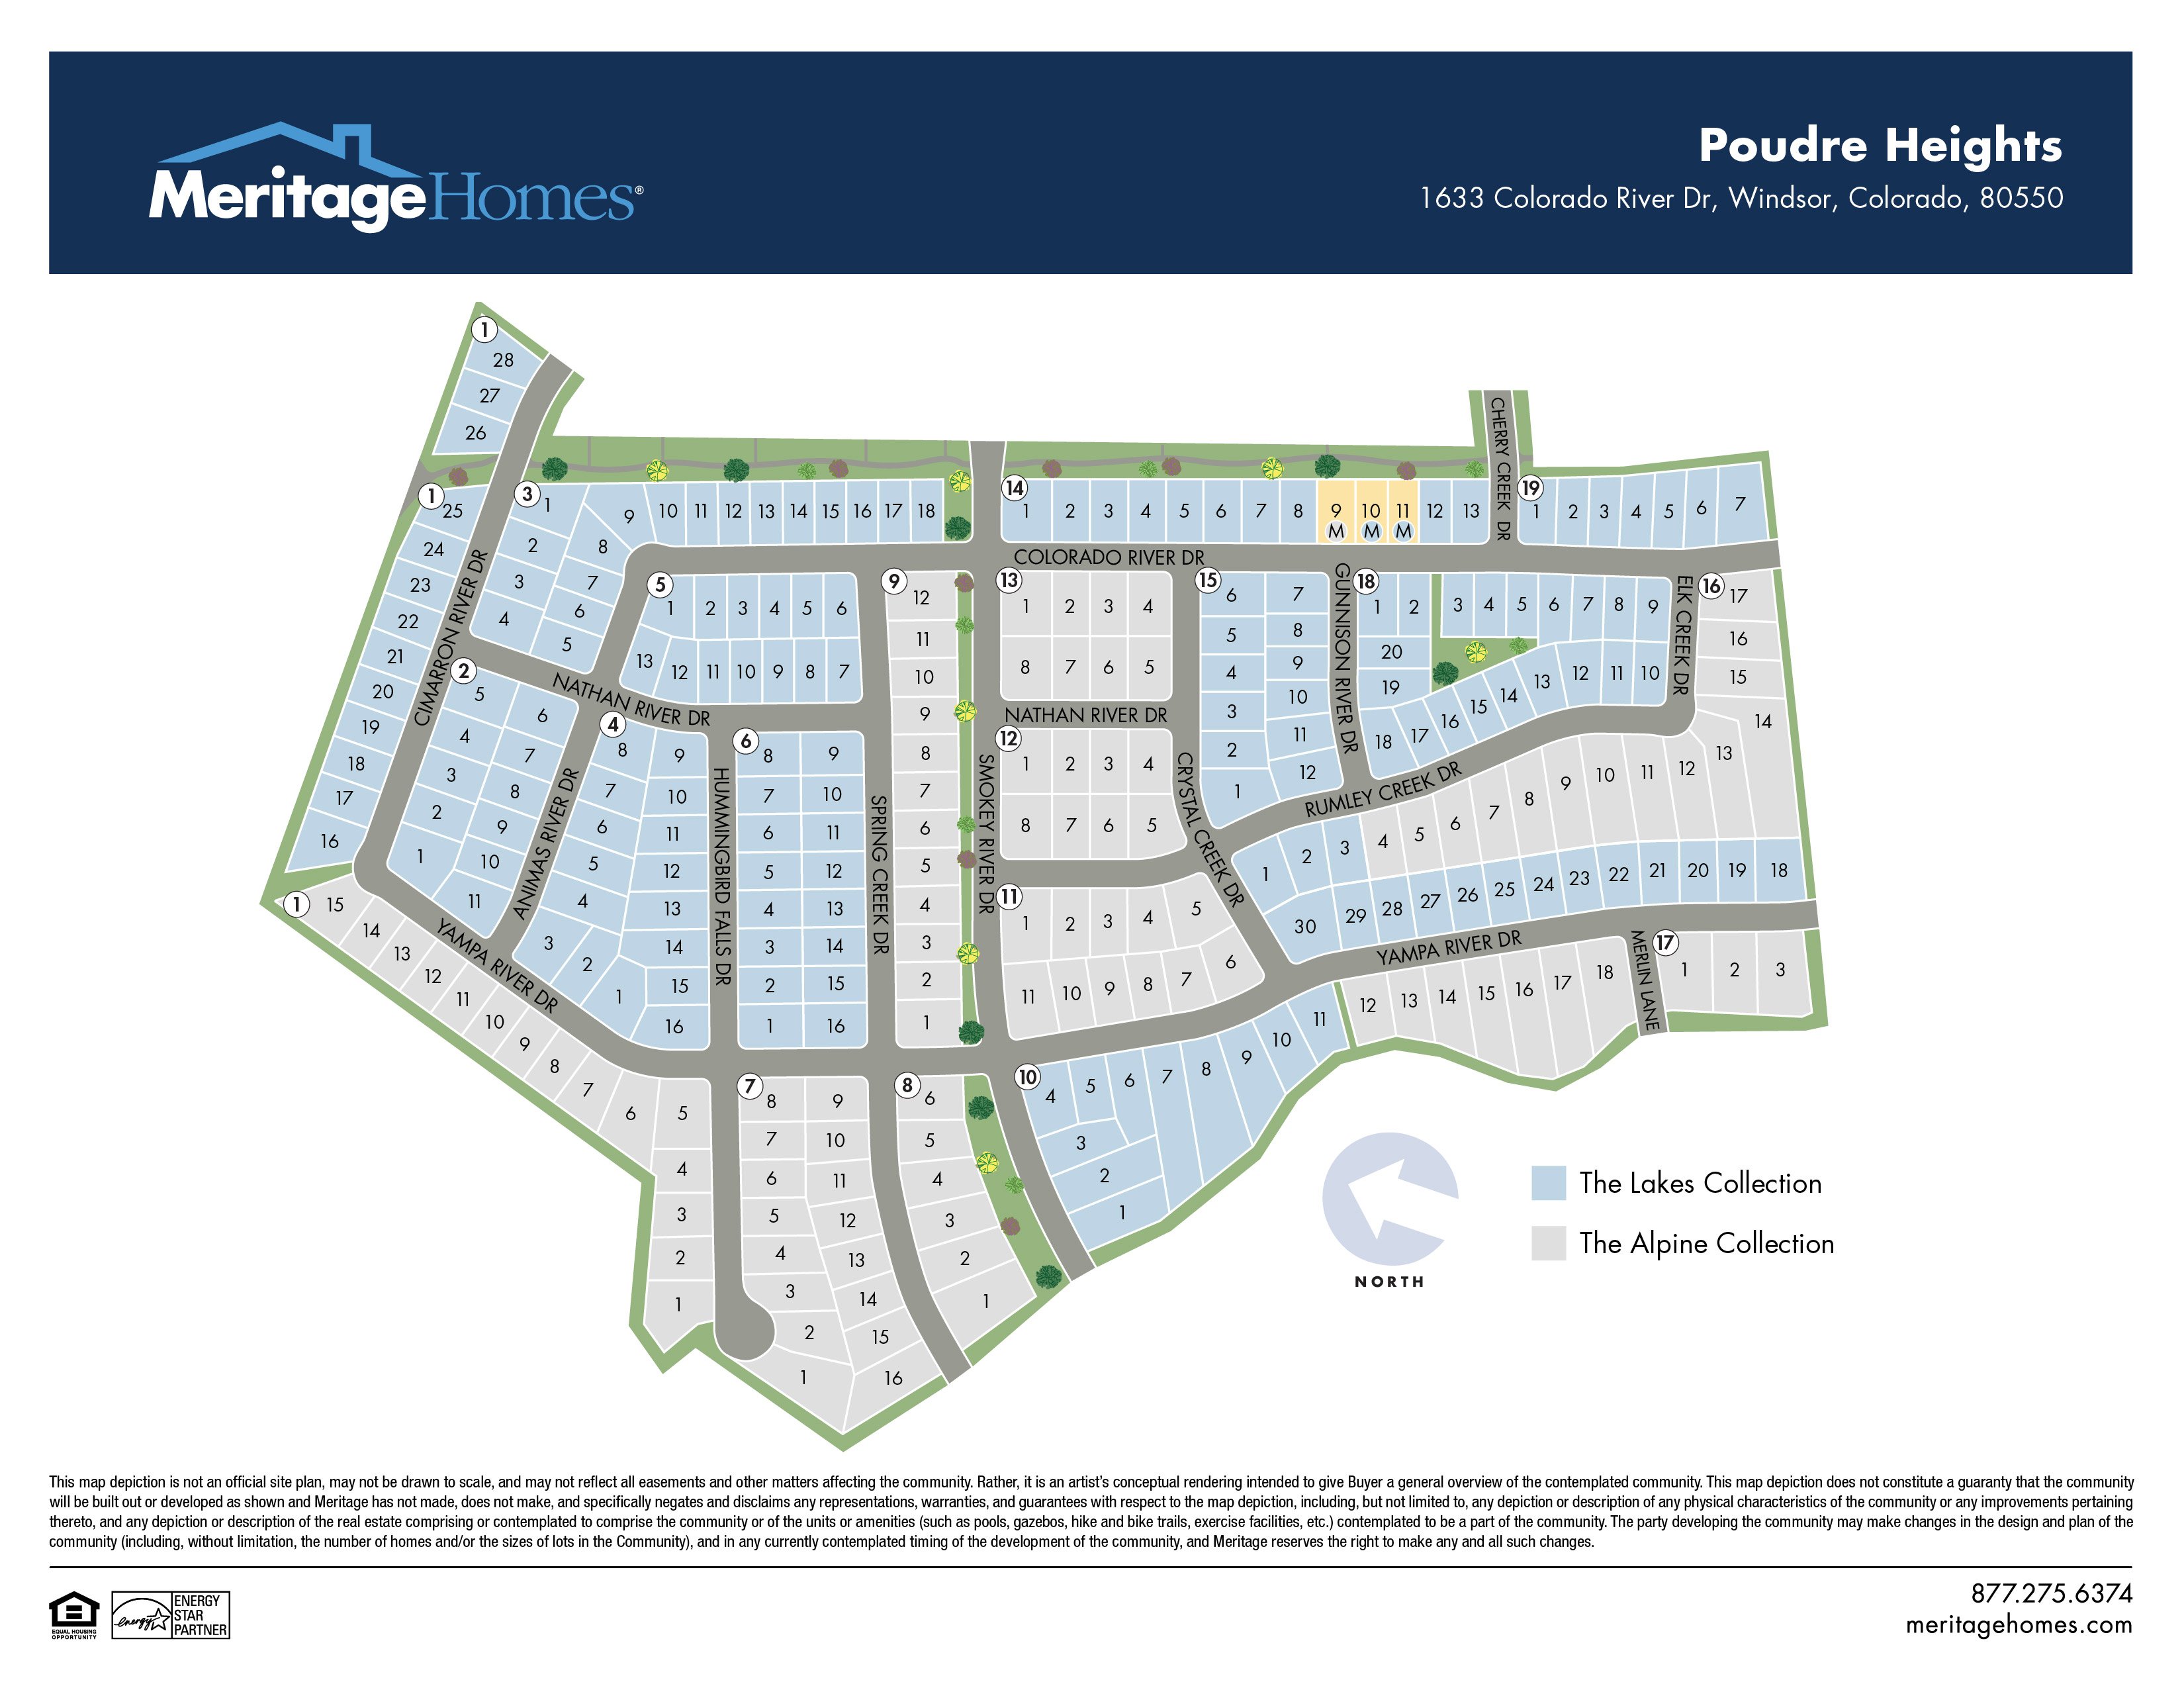 MCO5713 Poudre Site Map.jpg